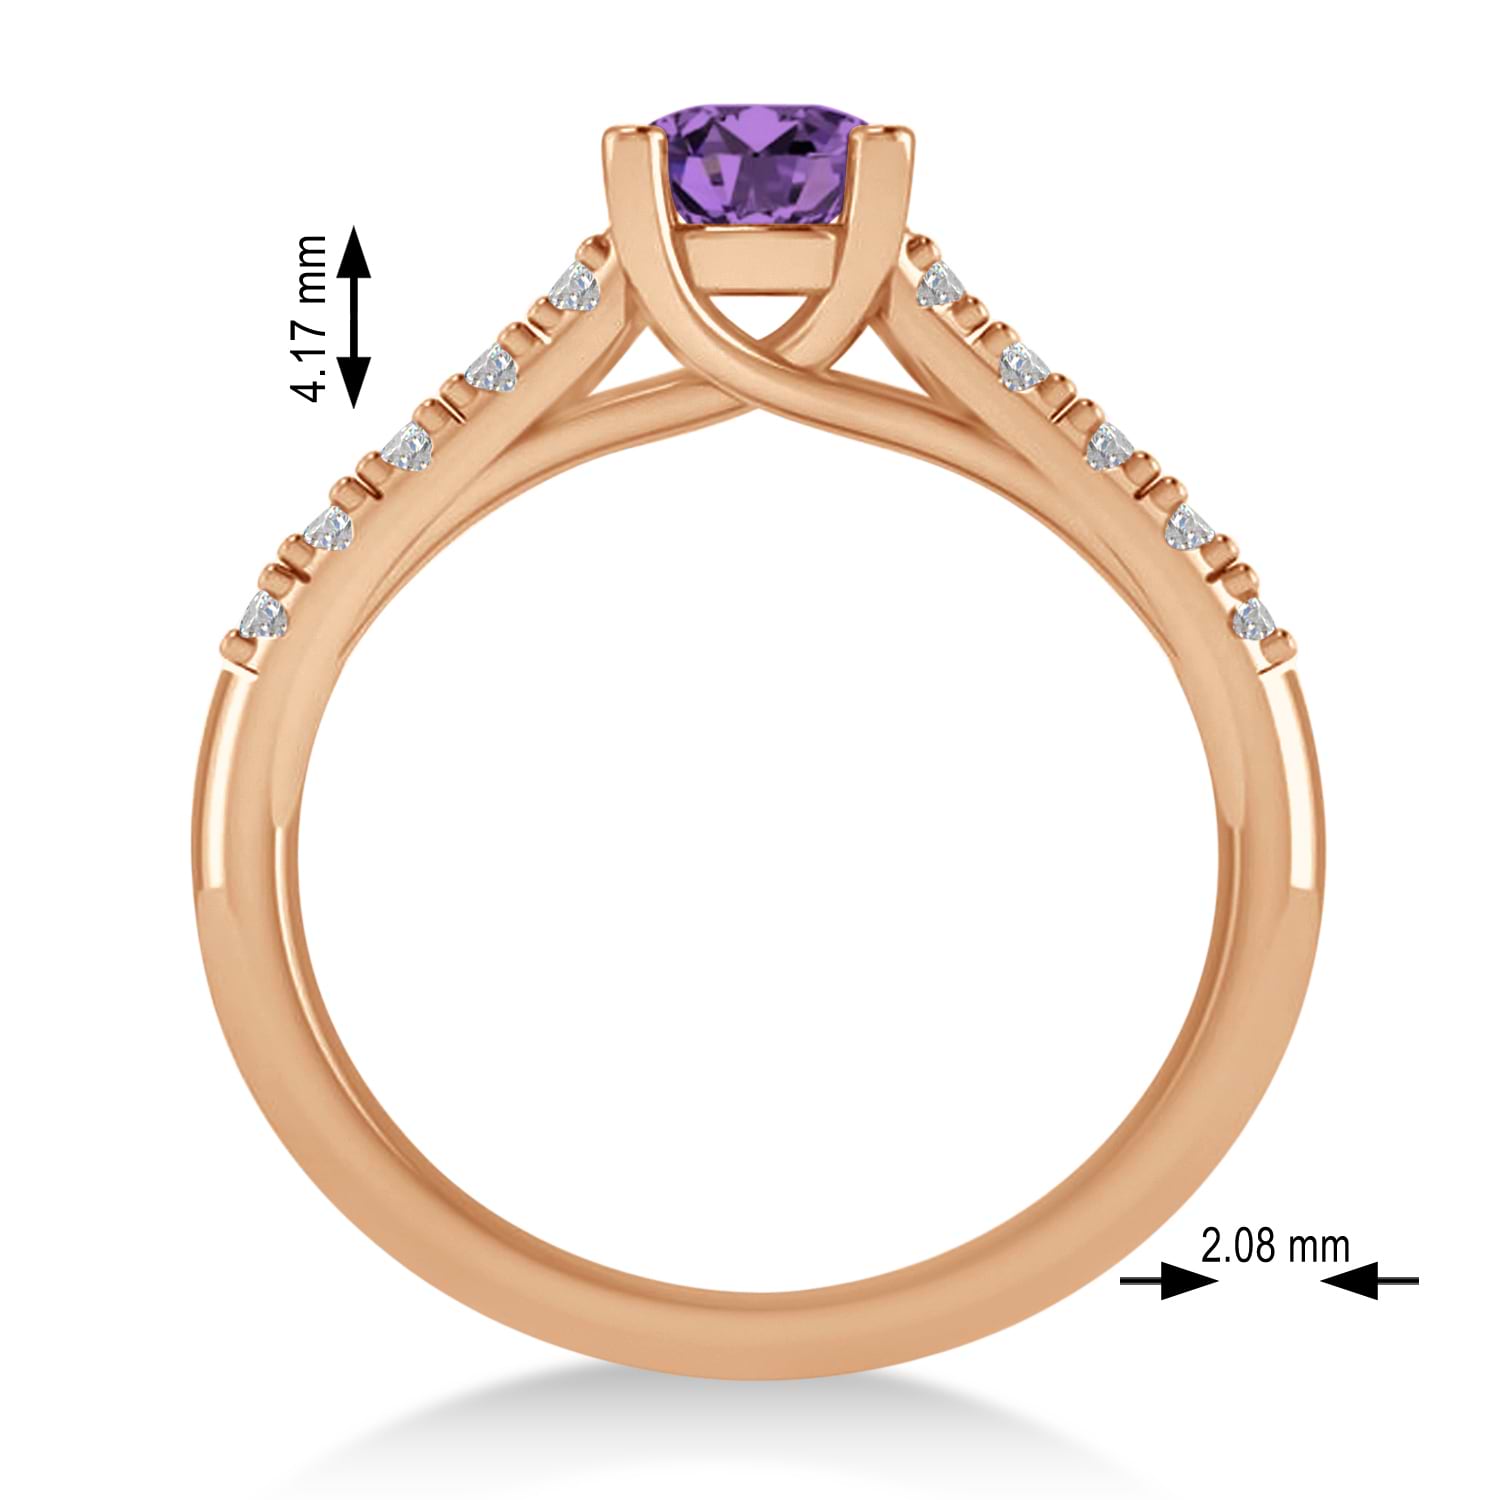 Amethyst & Diamond Accented Pre-Set Engagement Ring 14k Rose Gold (1.05ct)